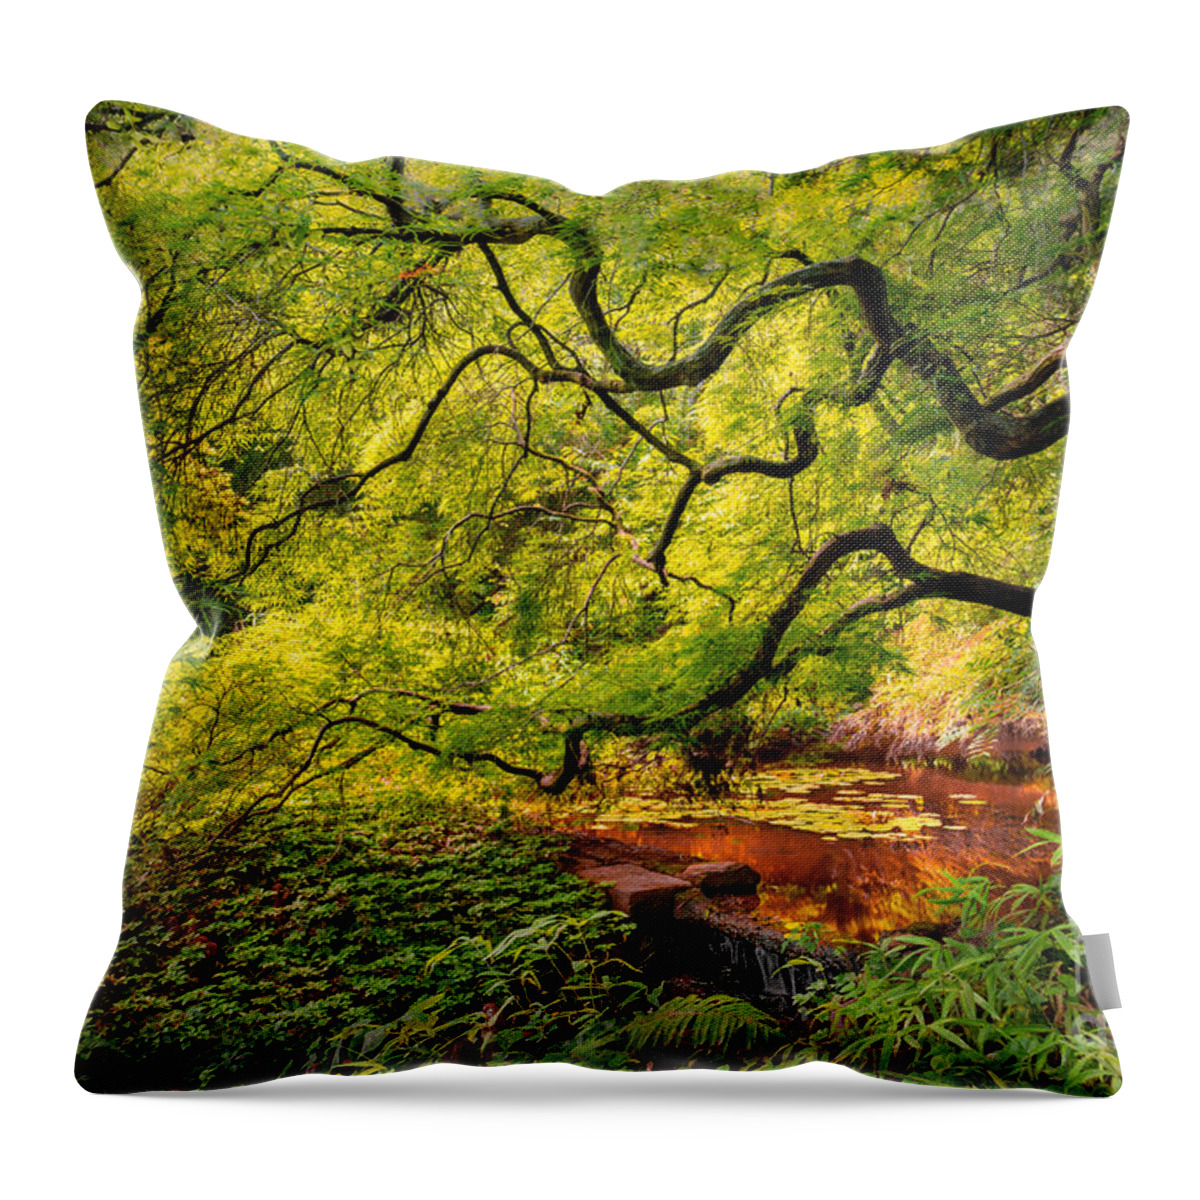  Throw Pillow featuring the photograph Tranquil Shade by Mark Rogers